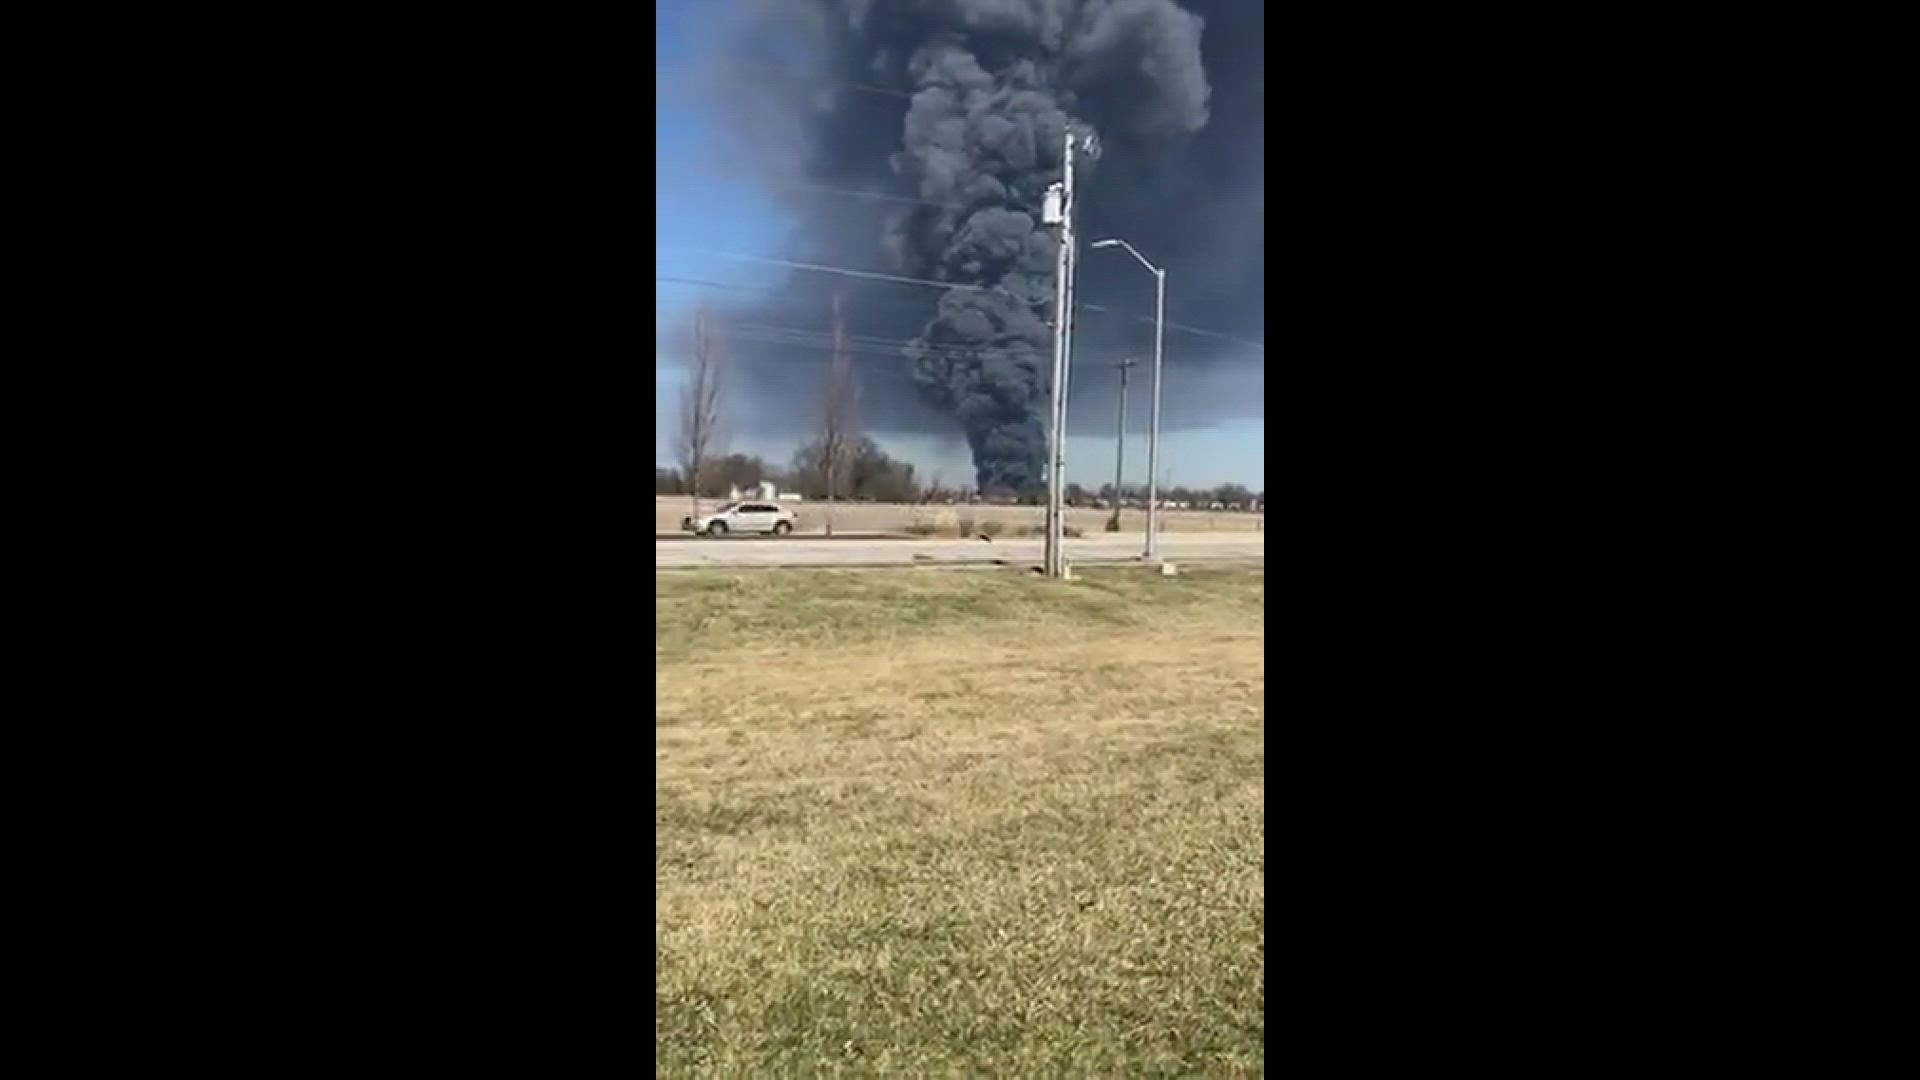 Smoke from a fire at the Walmart Distribution Center in Hendricks County could be seen for miles.
Credit: Vicki Crim